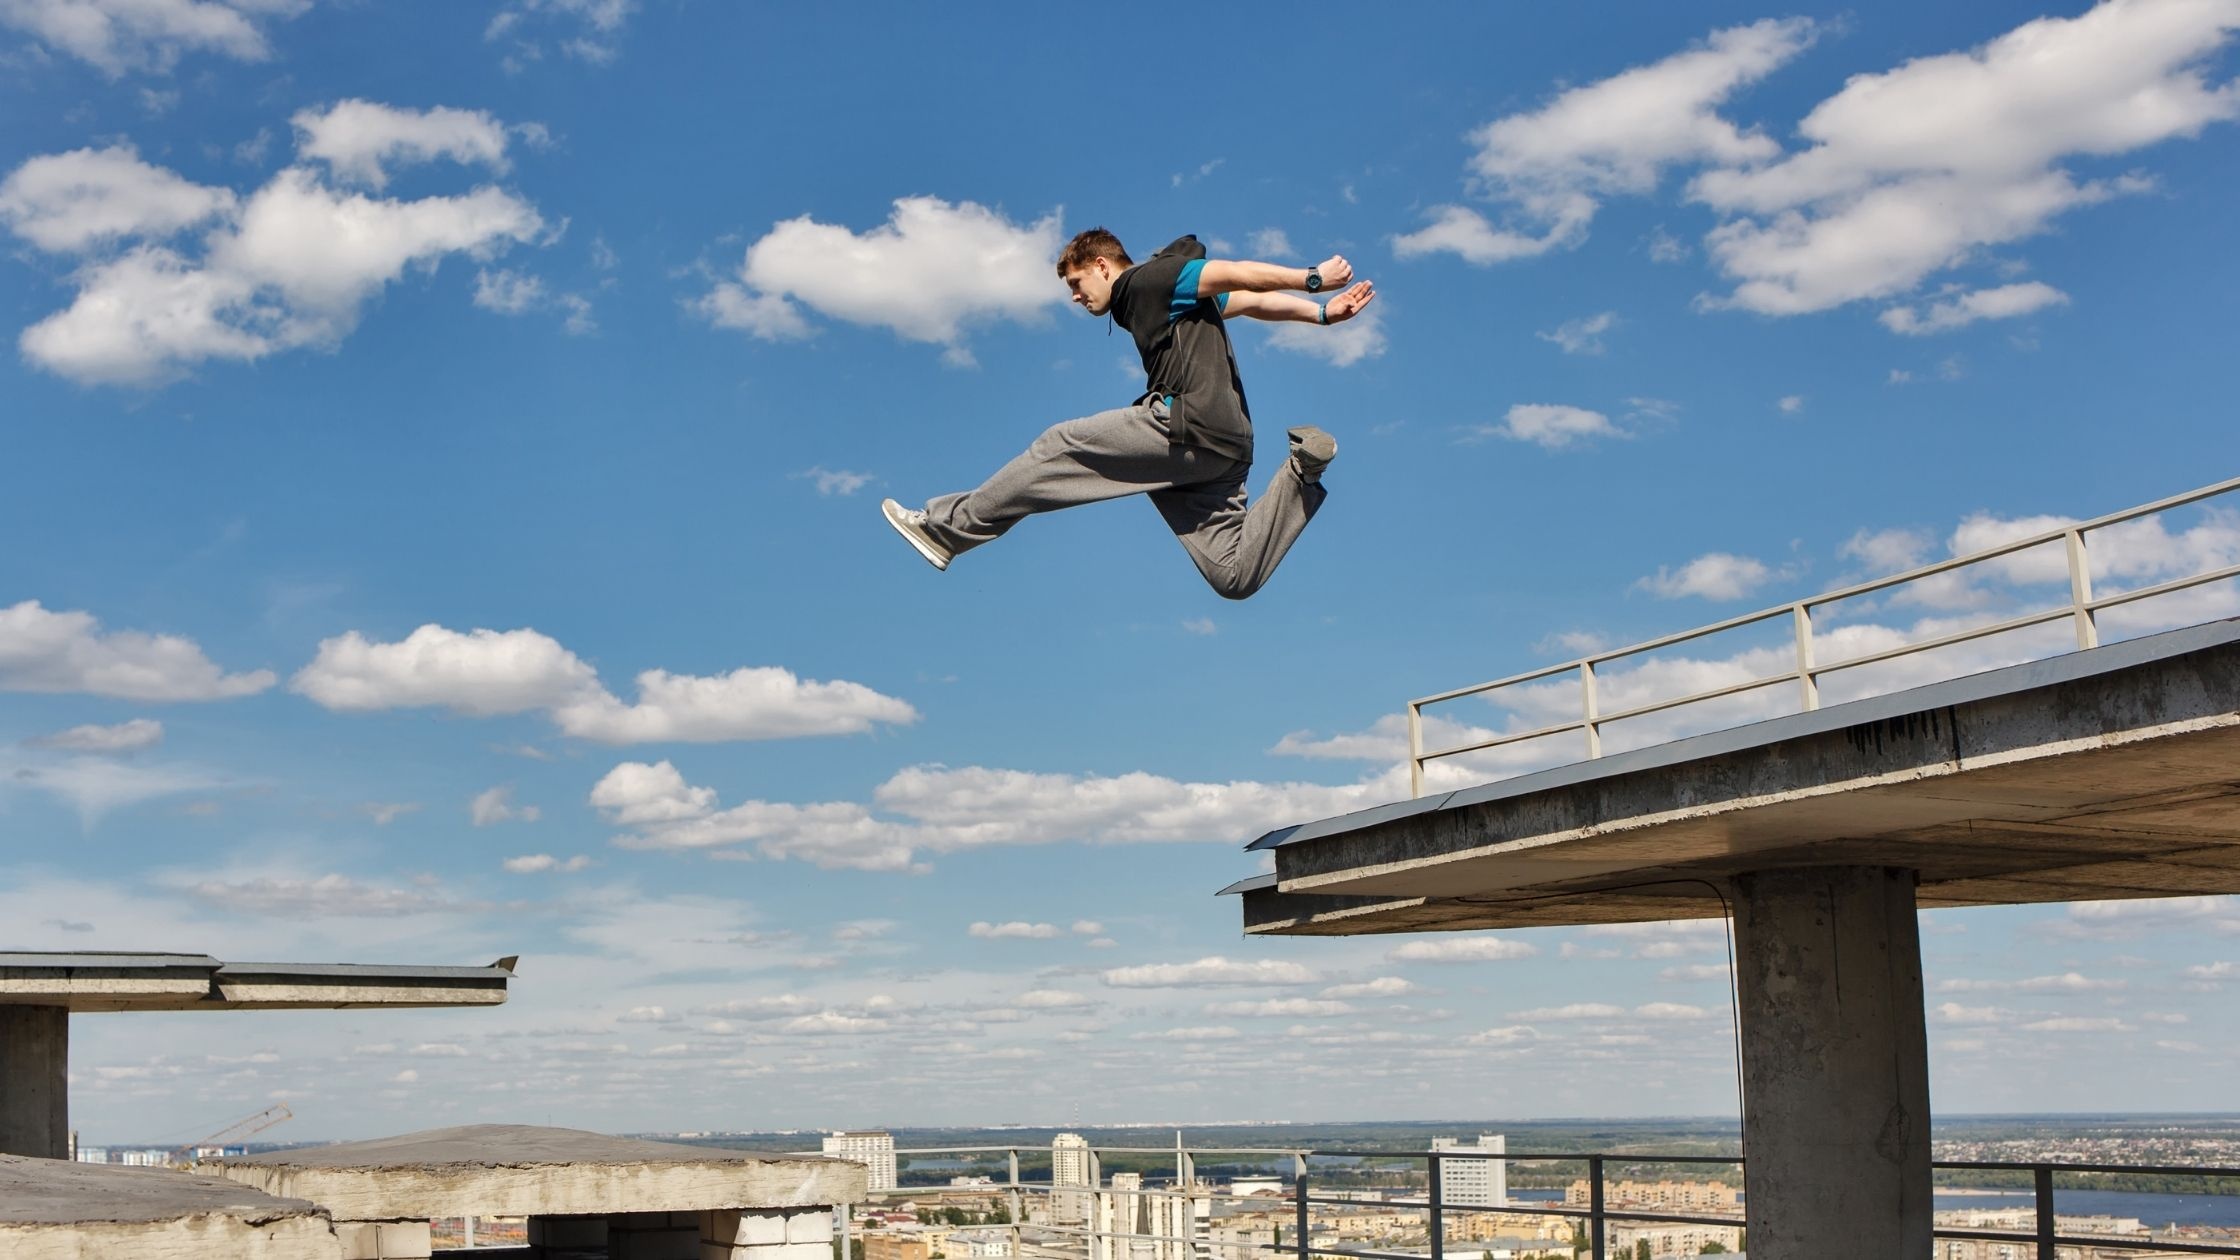 Parkour: Precision jumping, Action of high risk, Urban freerunning. 2240x1260 HD Background.